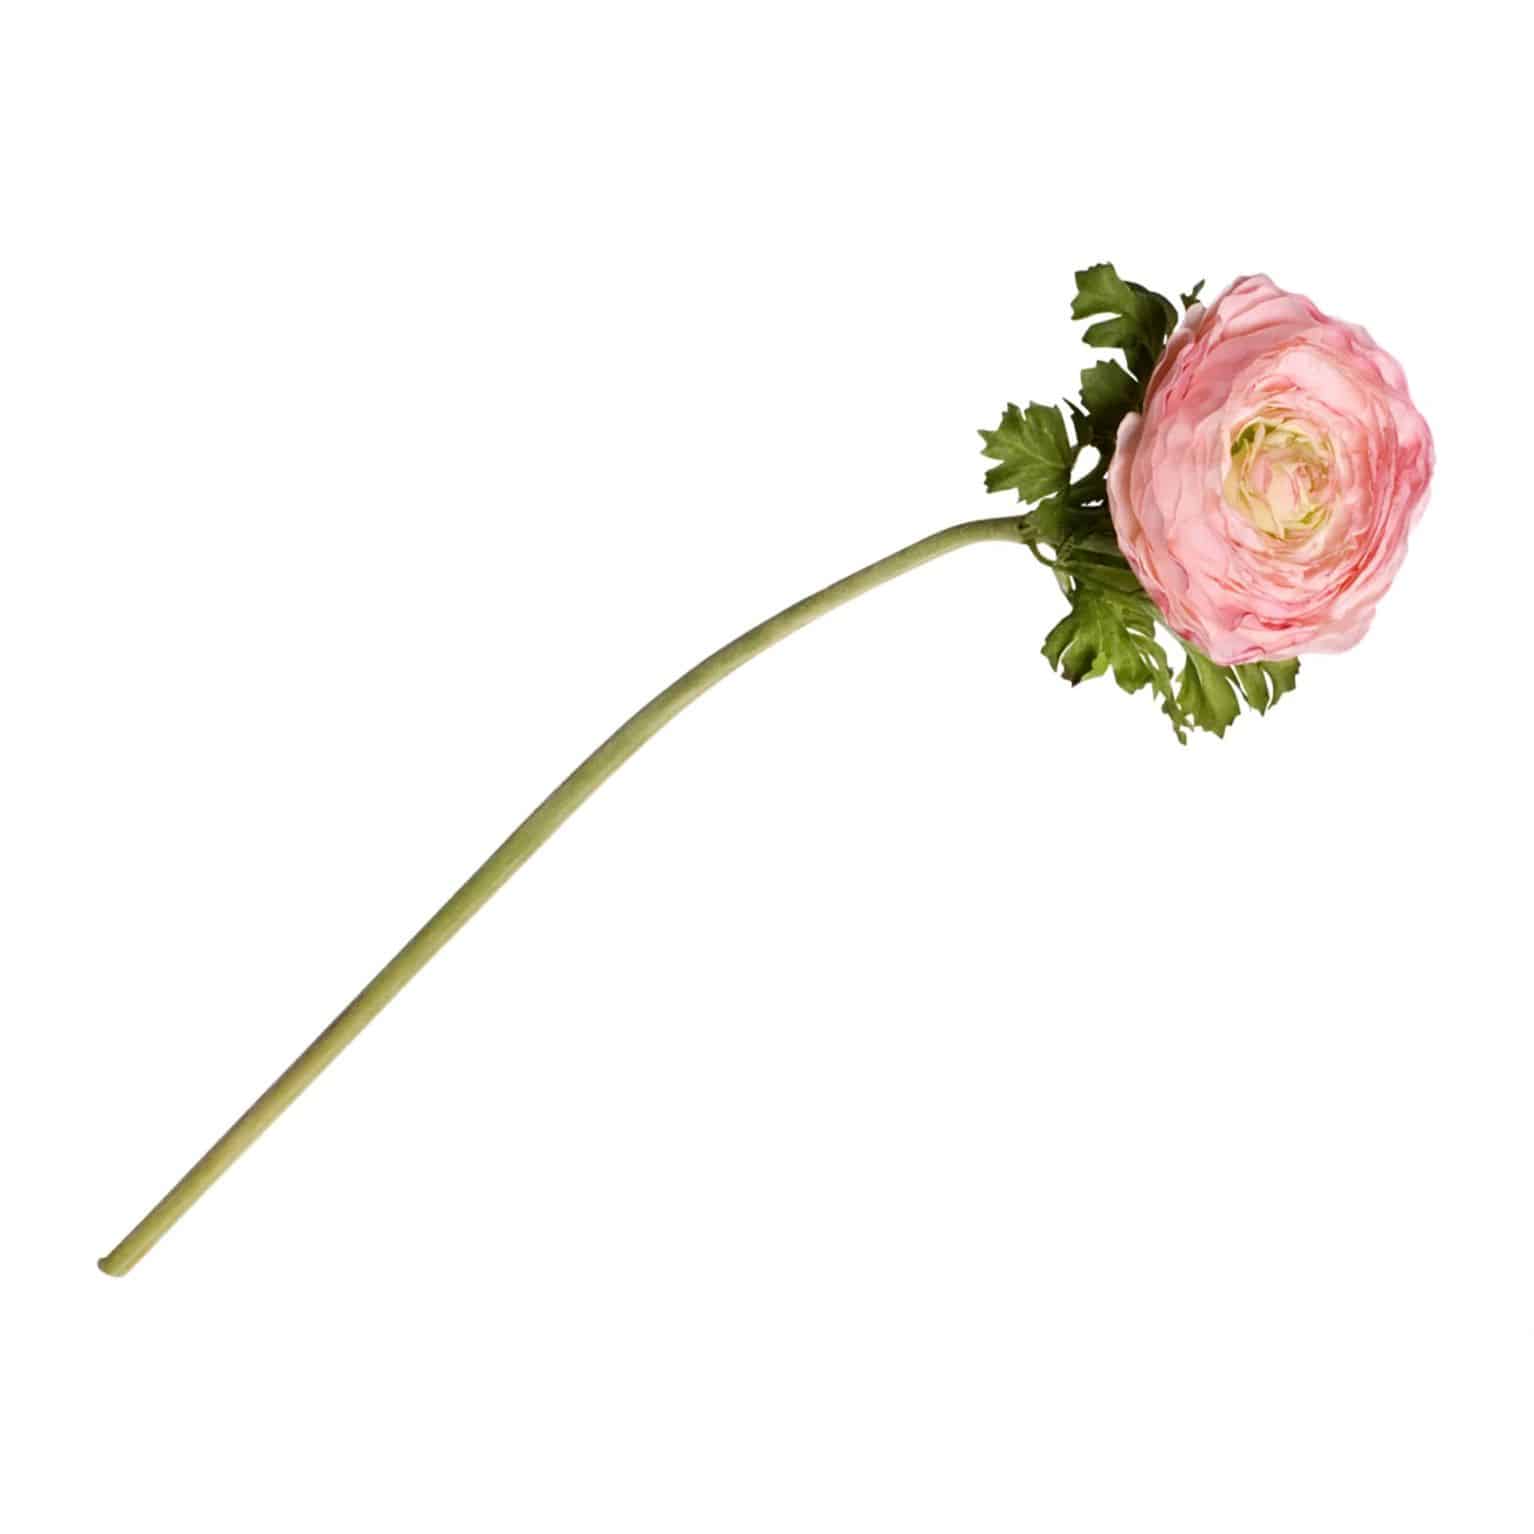 Buy full bloomed artificial ranunculus is wonderfully designed to show this flower at its finest. Natural pink colour is superbly lifelike authentic centre.